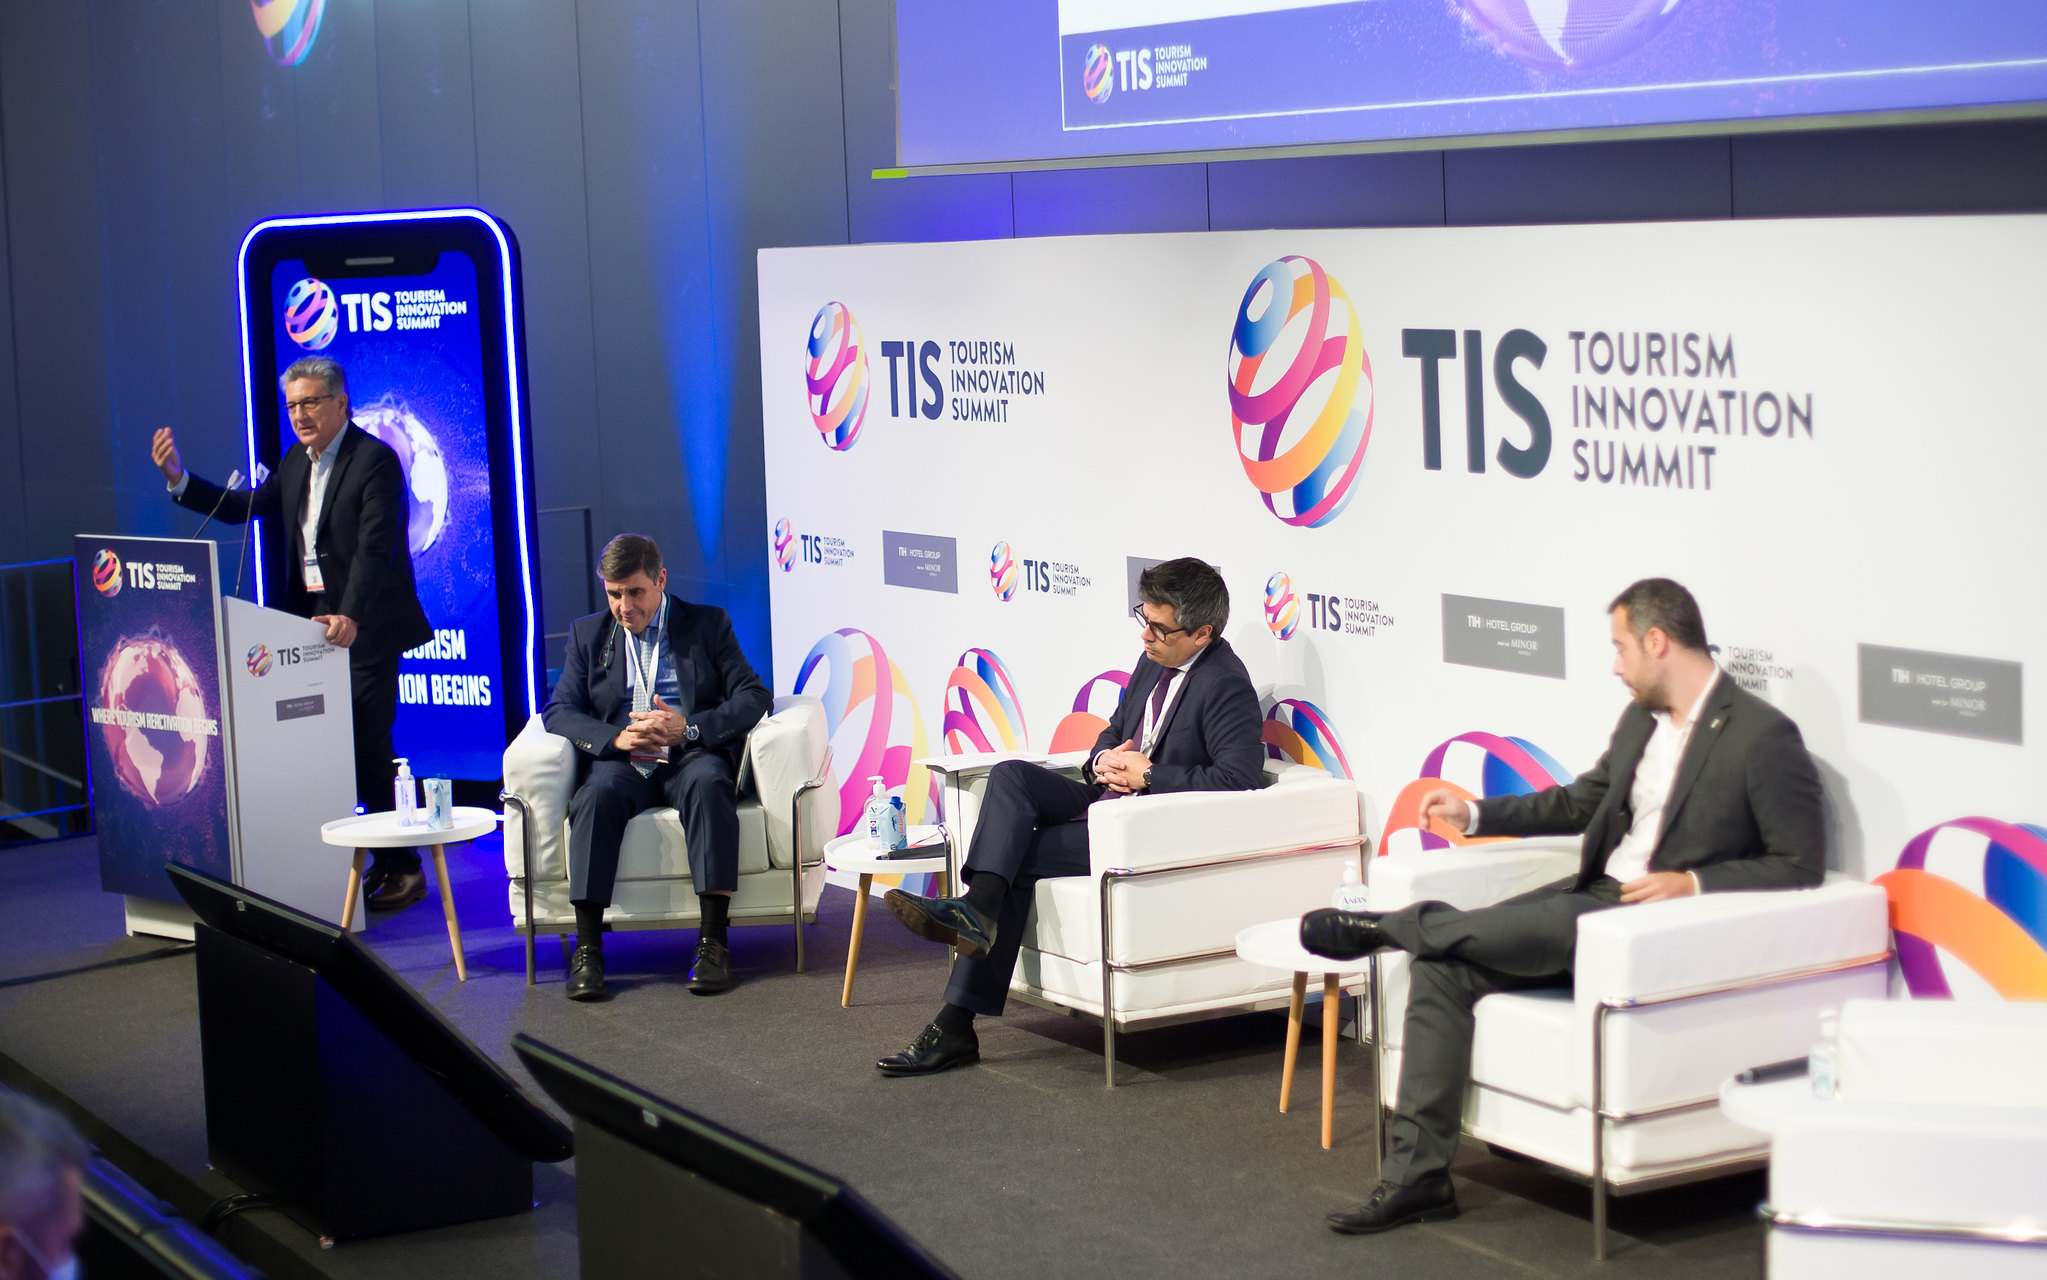 Tourism Innovation Summit 2021 is back physically in Seville with a top-notch line up of travel leaders Ryanair, Accor, Vueling, LATAM Airlines, Hilton, Expedia, PATA or WTTC 